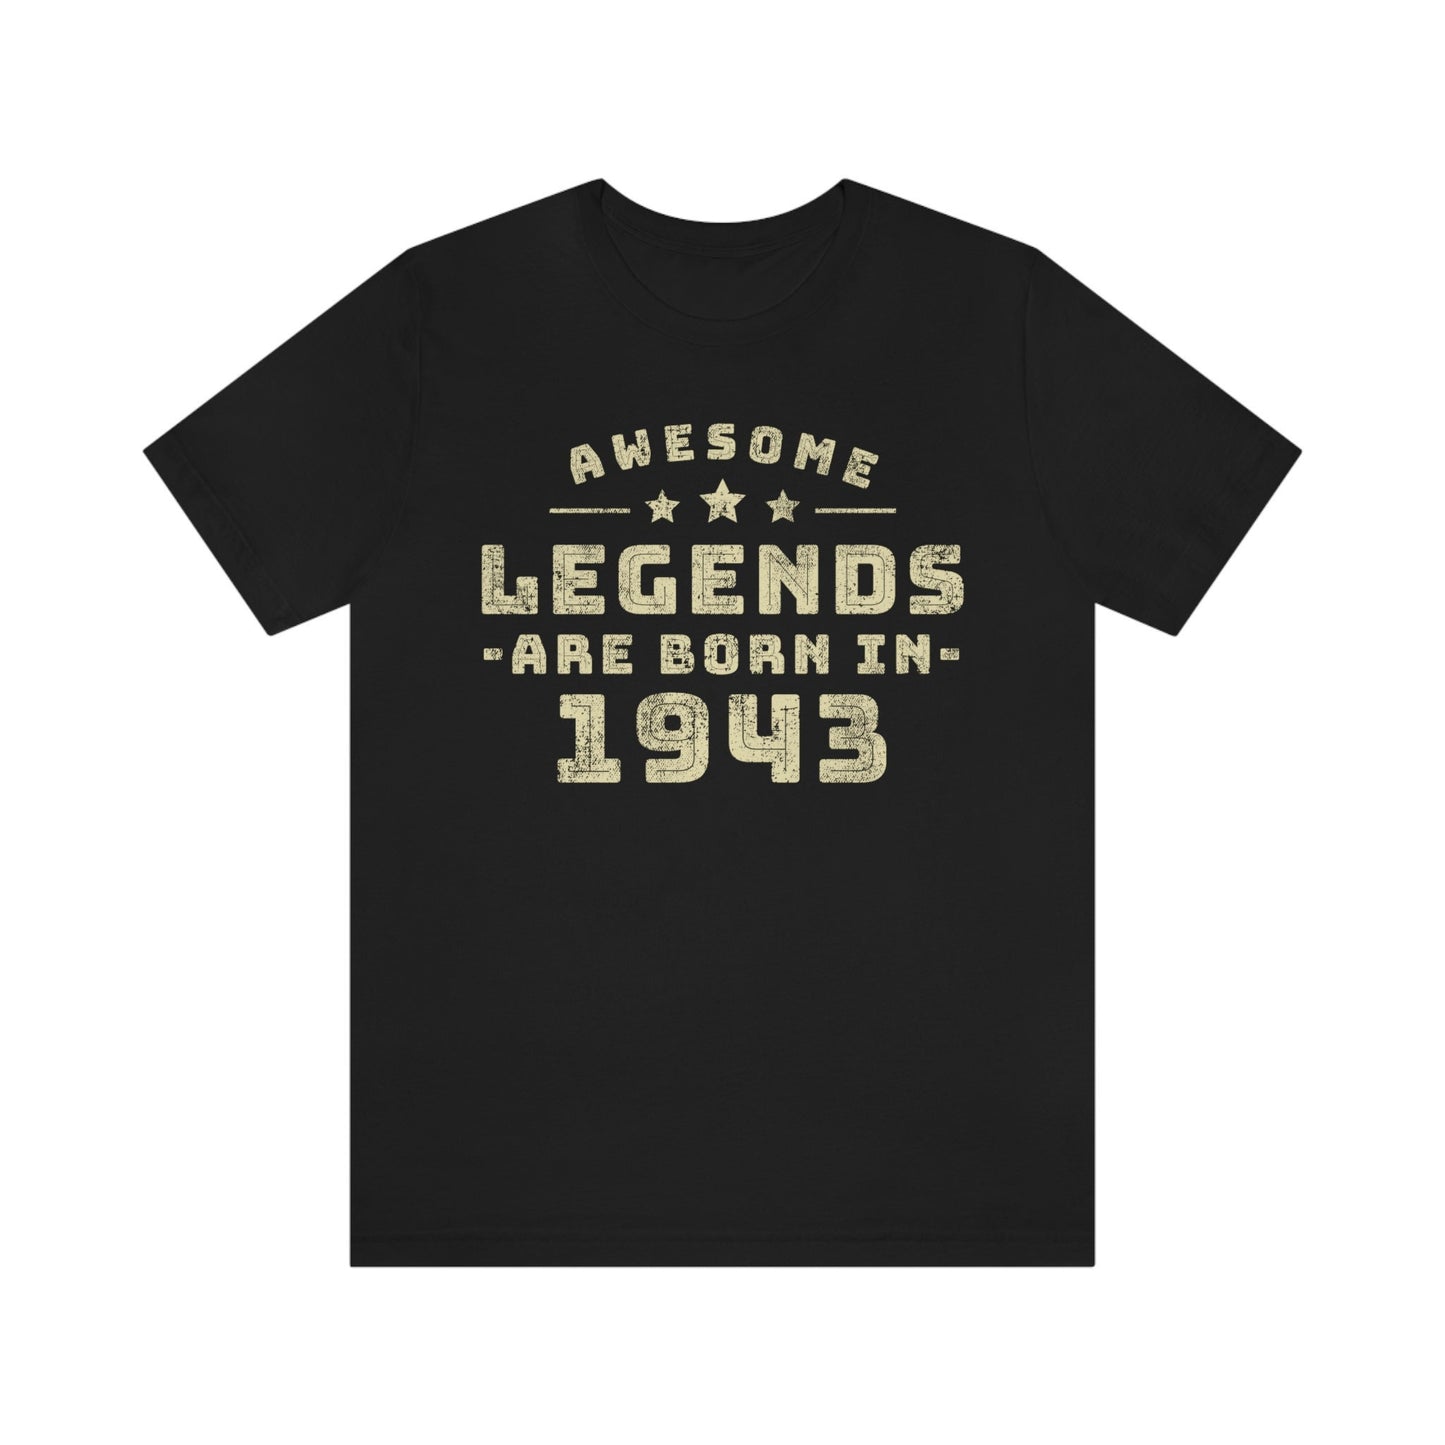 Awesome Legends are born in 1943 birthday shirt for men or women, Gift shirt for wife or husband